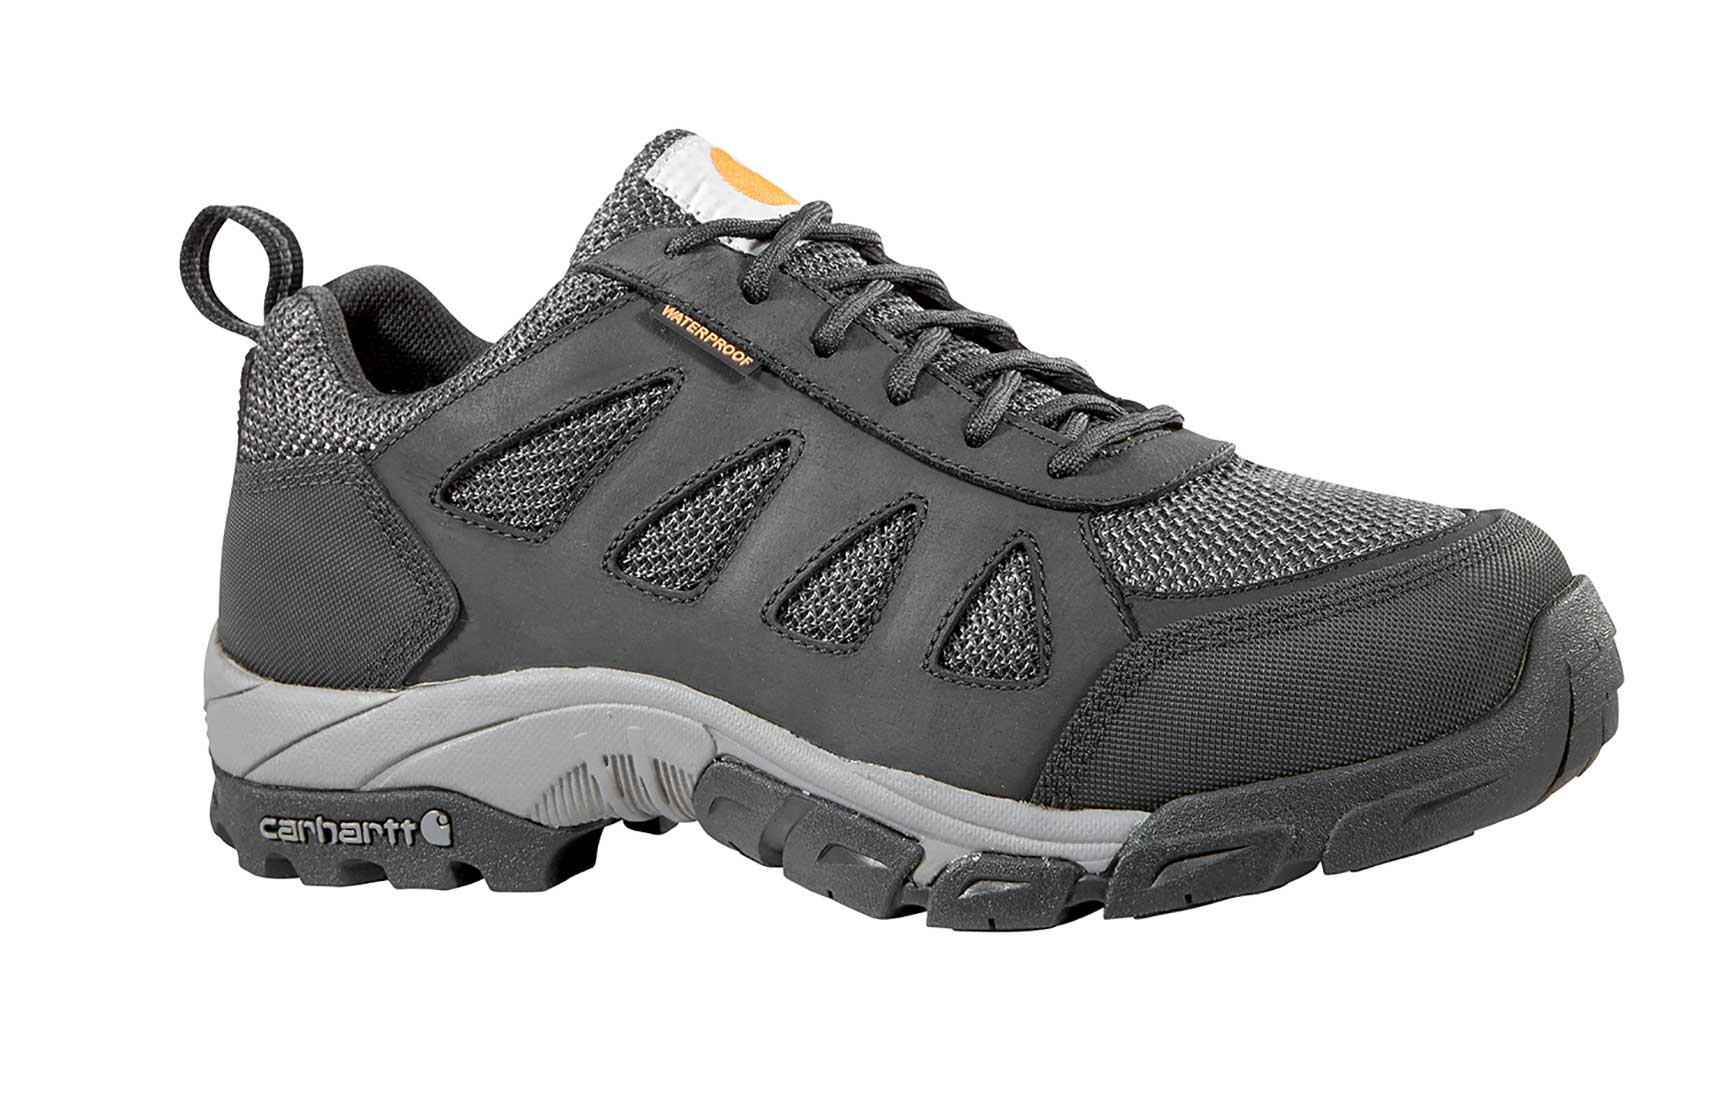 composite toe lightweight shoes